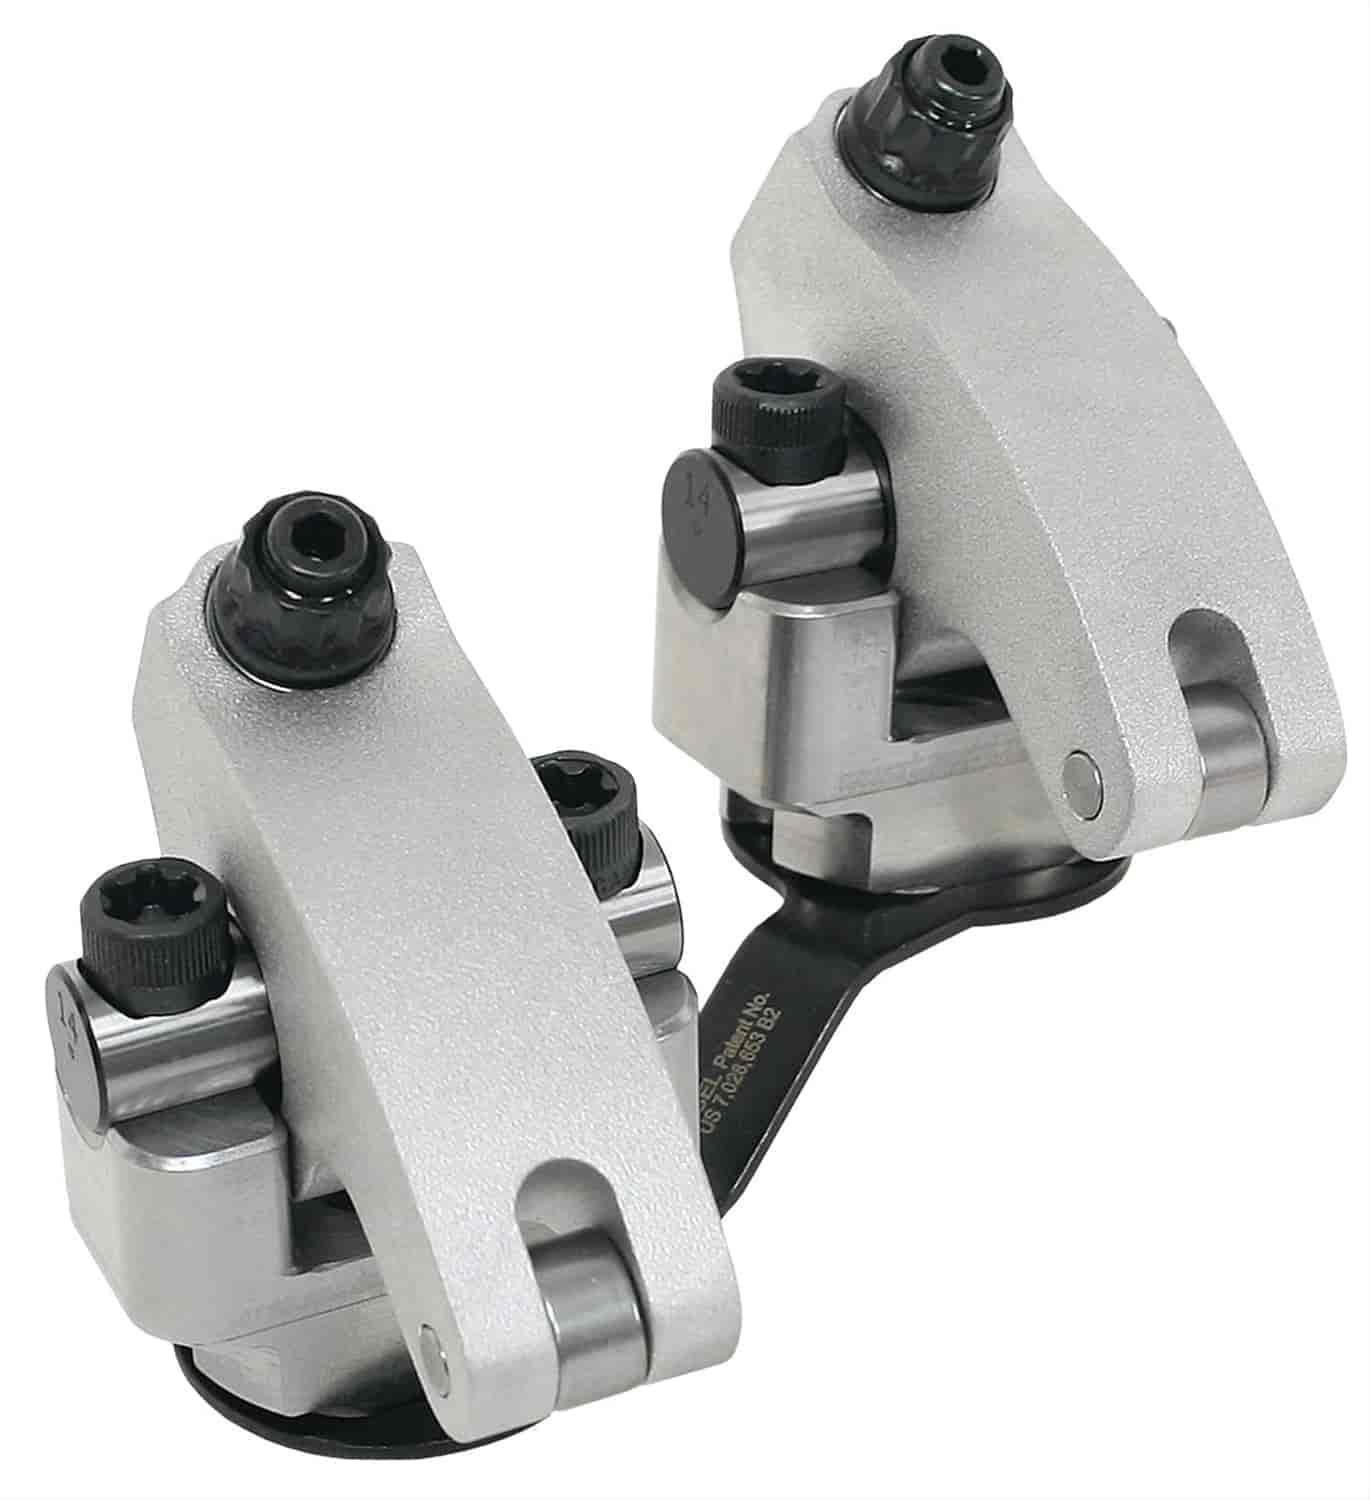 Series SS Shaft Mount Rockers Fits: World Products Merlin Oval/Cast Iron Rocker Ratio: 1.8 IN / 1.8 EX